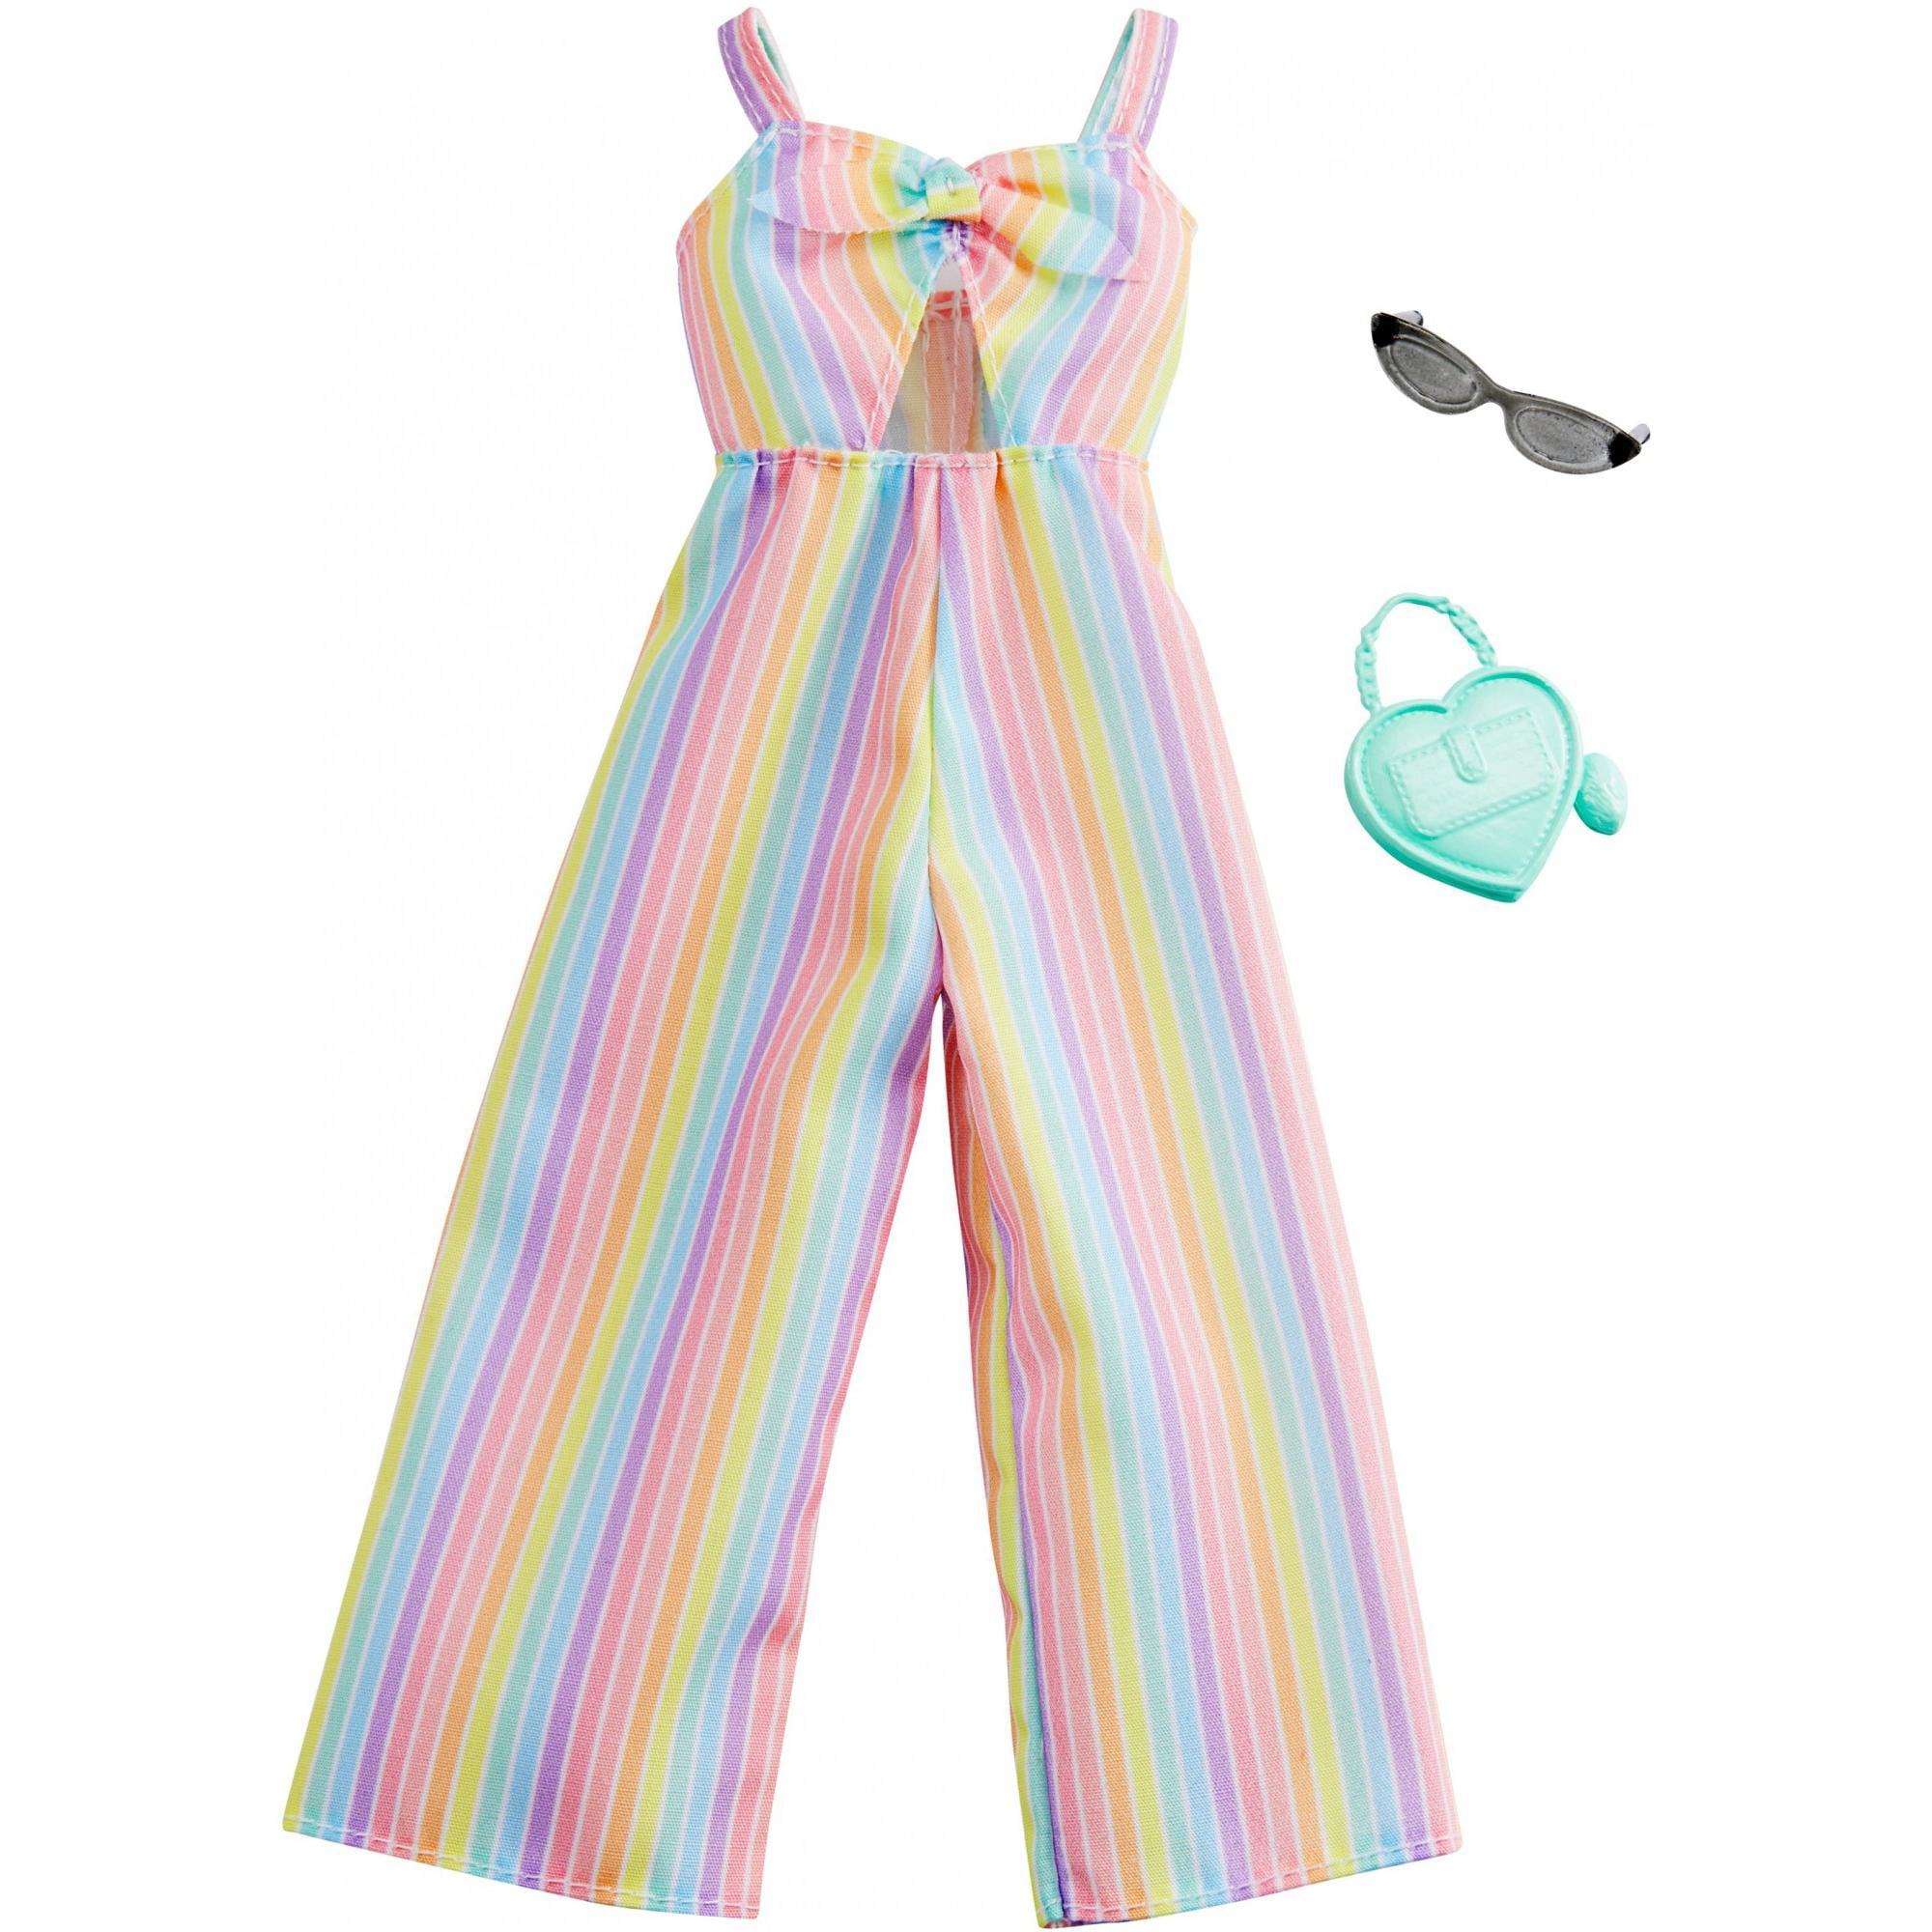 New Barbie clothes outfit short jumpsuit funky bright exciting fresh colorful 